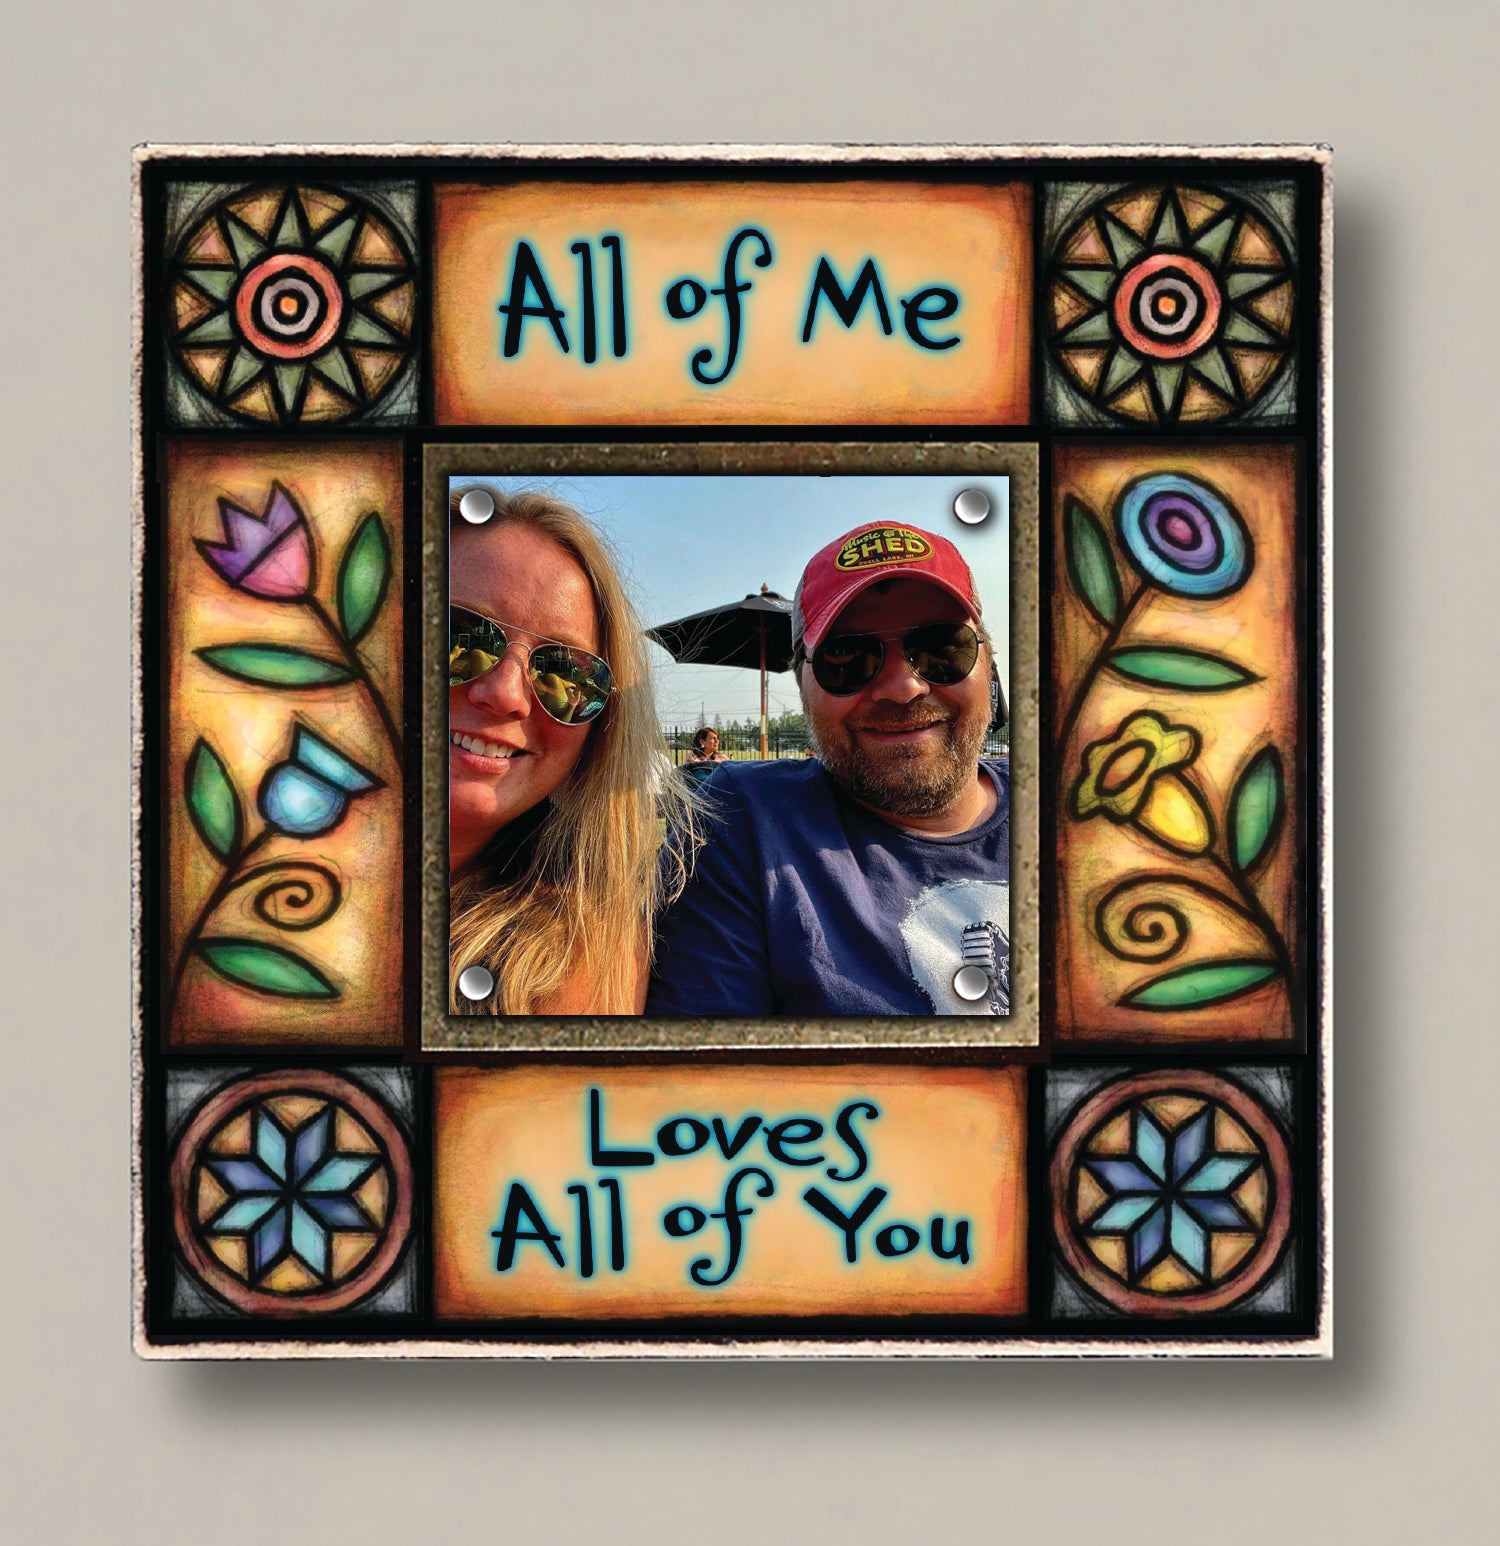 All of Me Small Frame